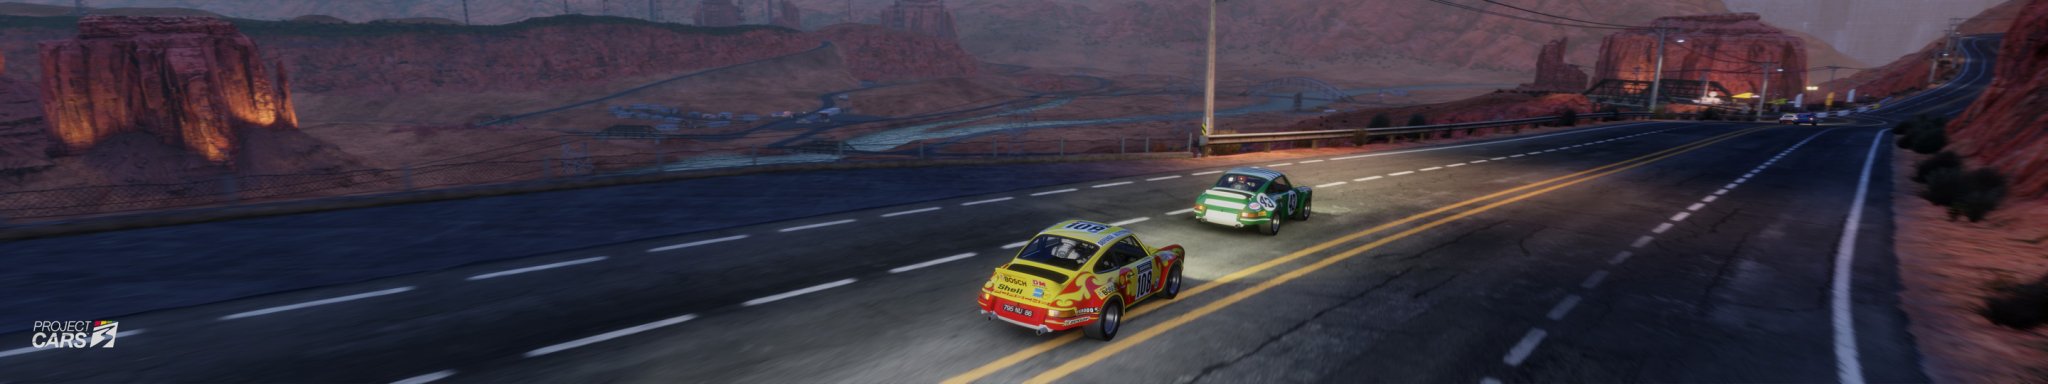 00 PROJECT CARS 3 MONUMENT CANYON with PIR RANGE CARS copy.jpg